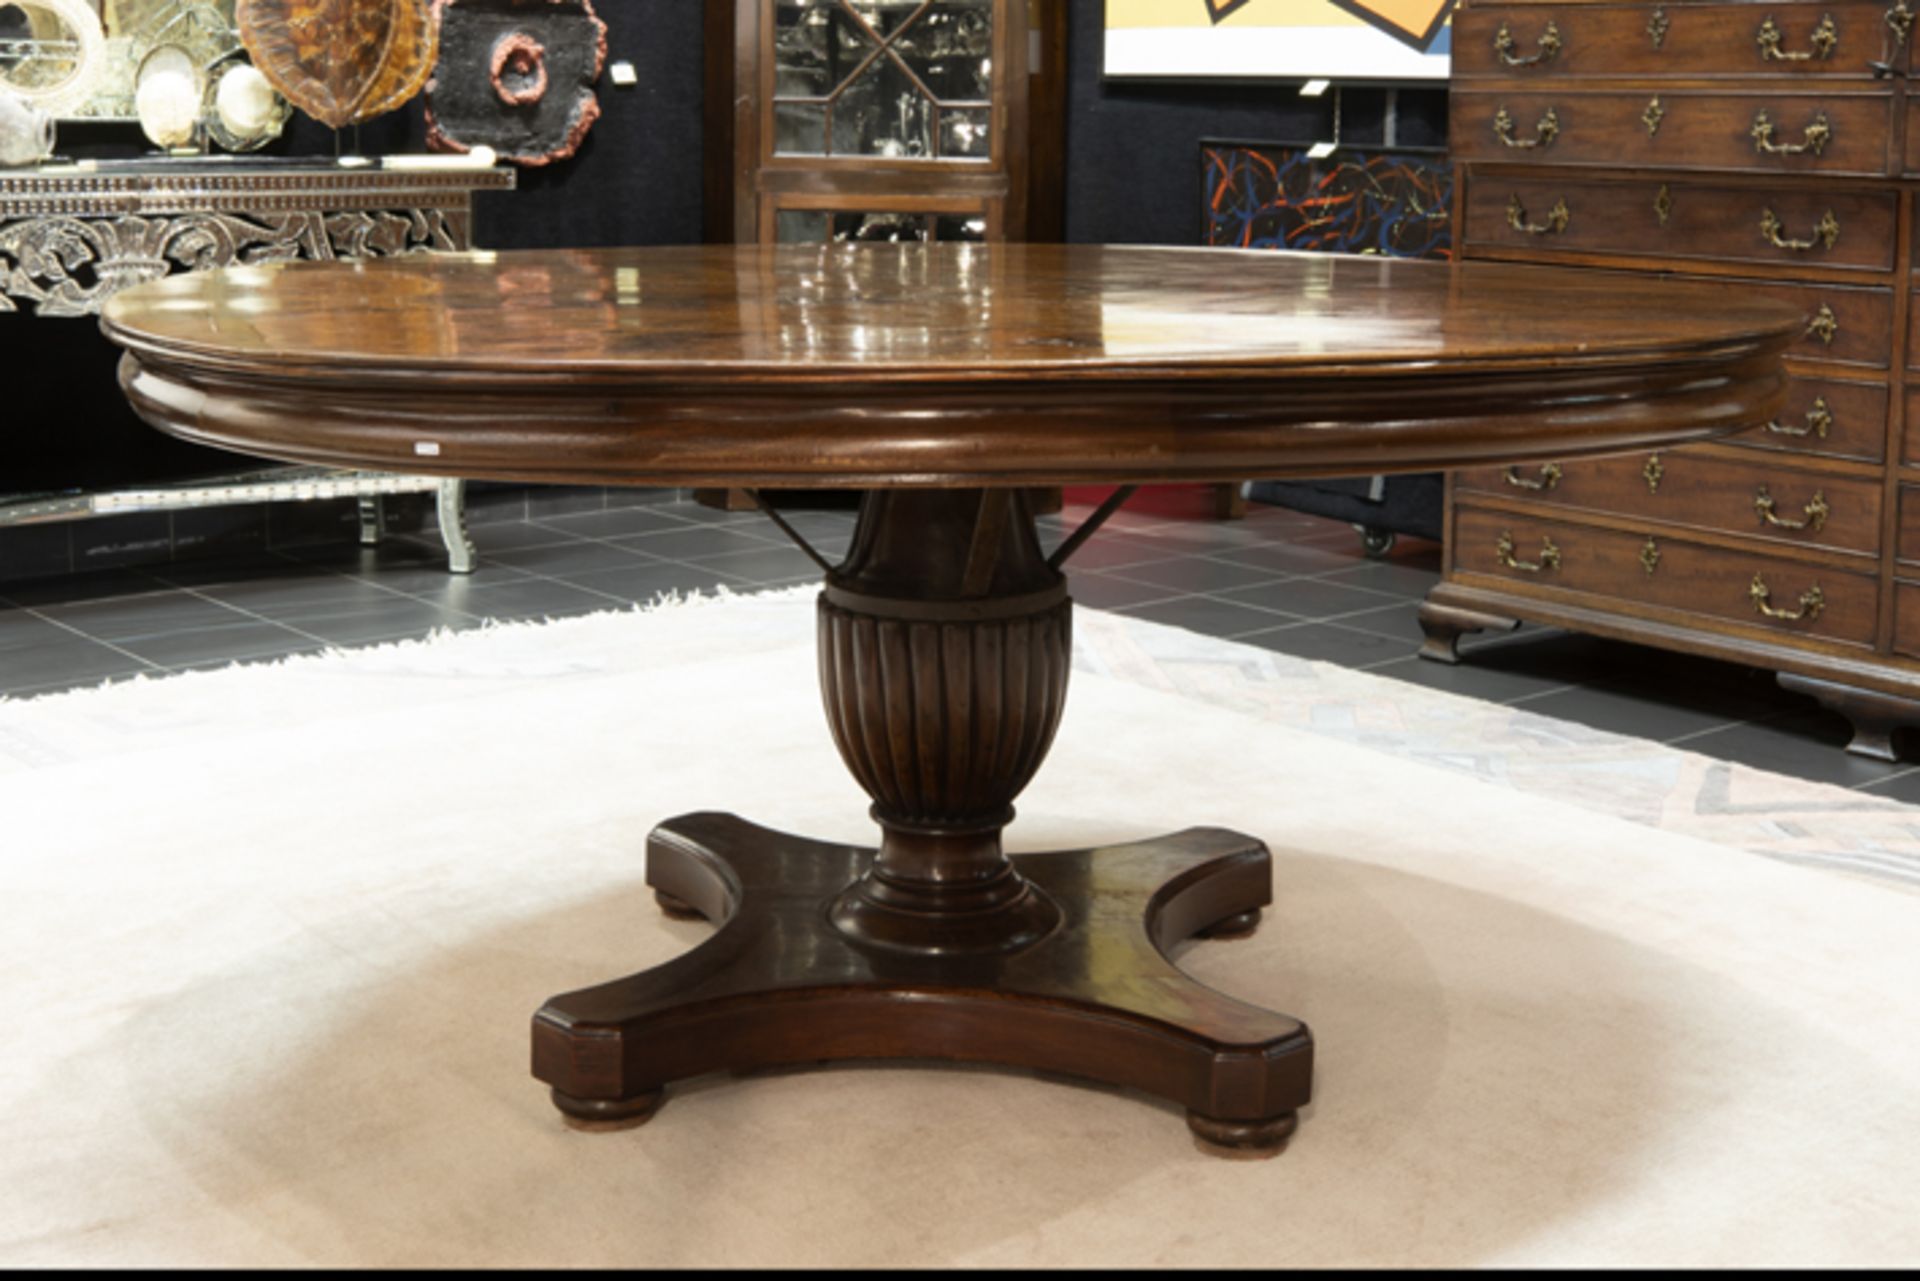 18th/19th Cent. neoclassical table in mahogany with a quite rare large size Goede achttiende/